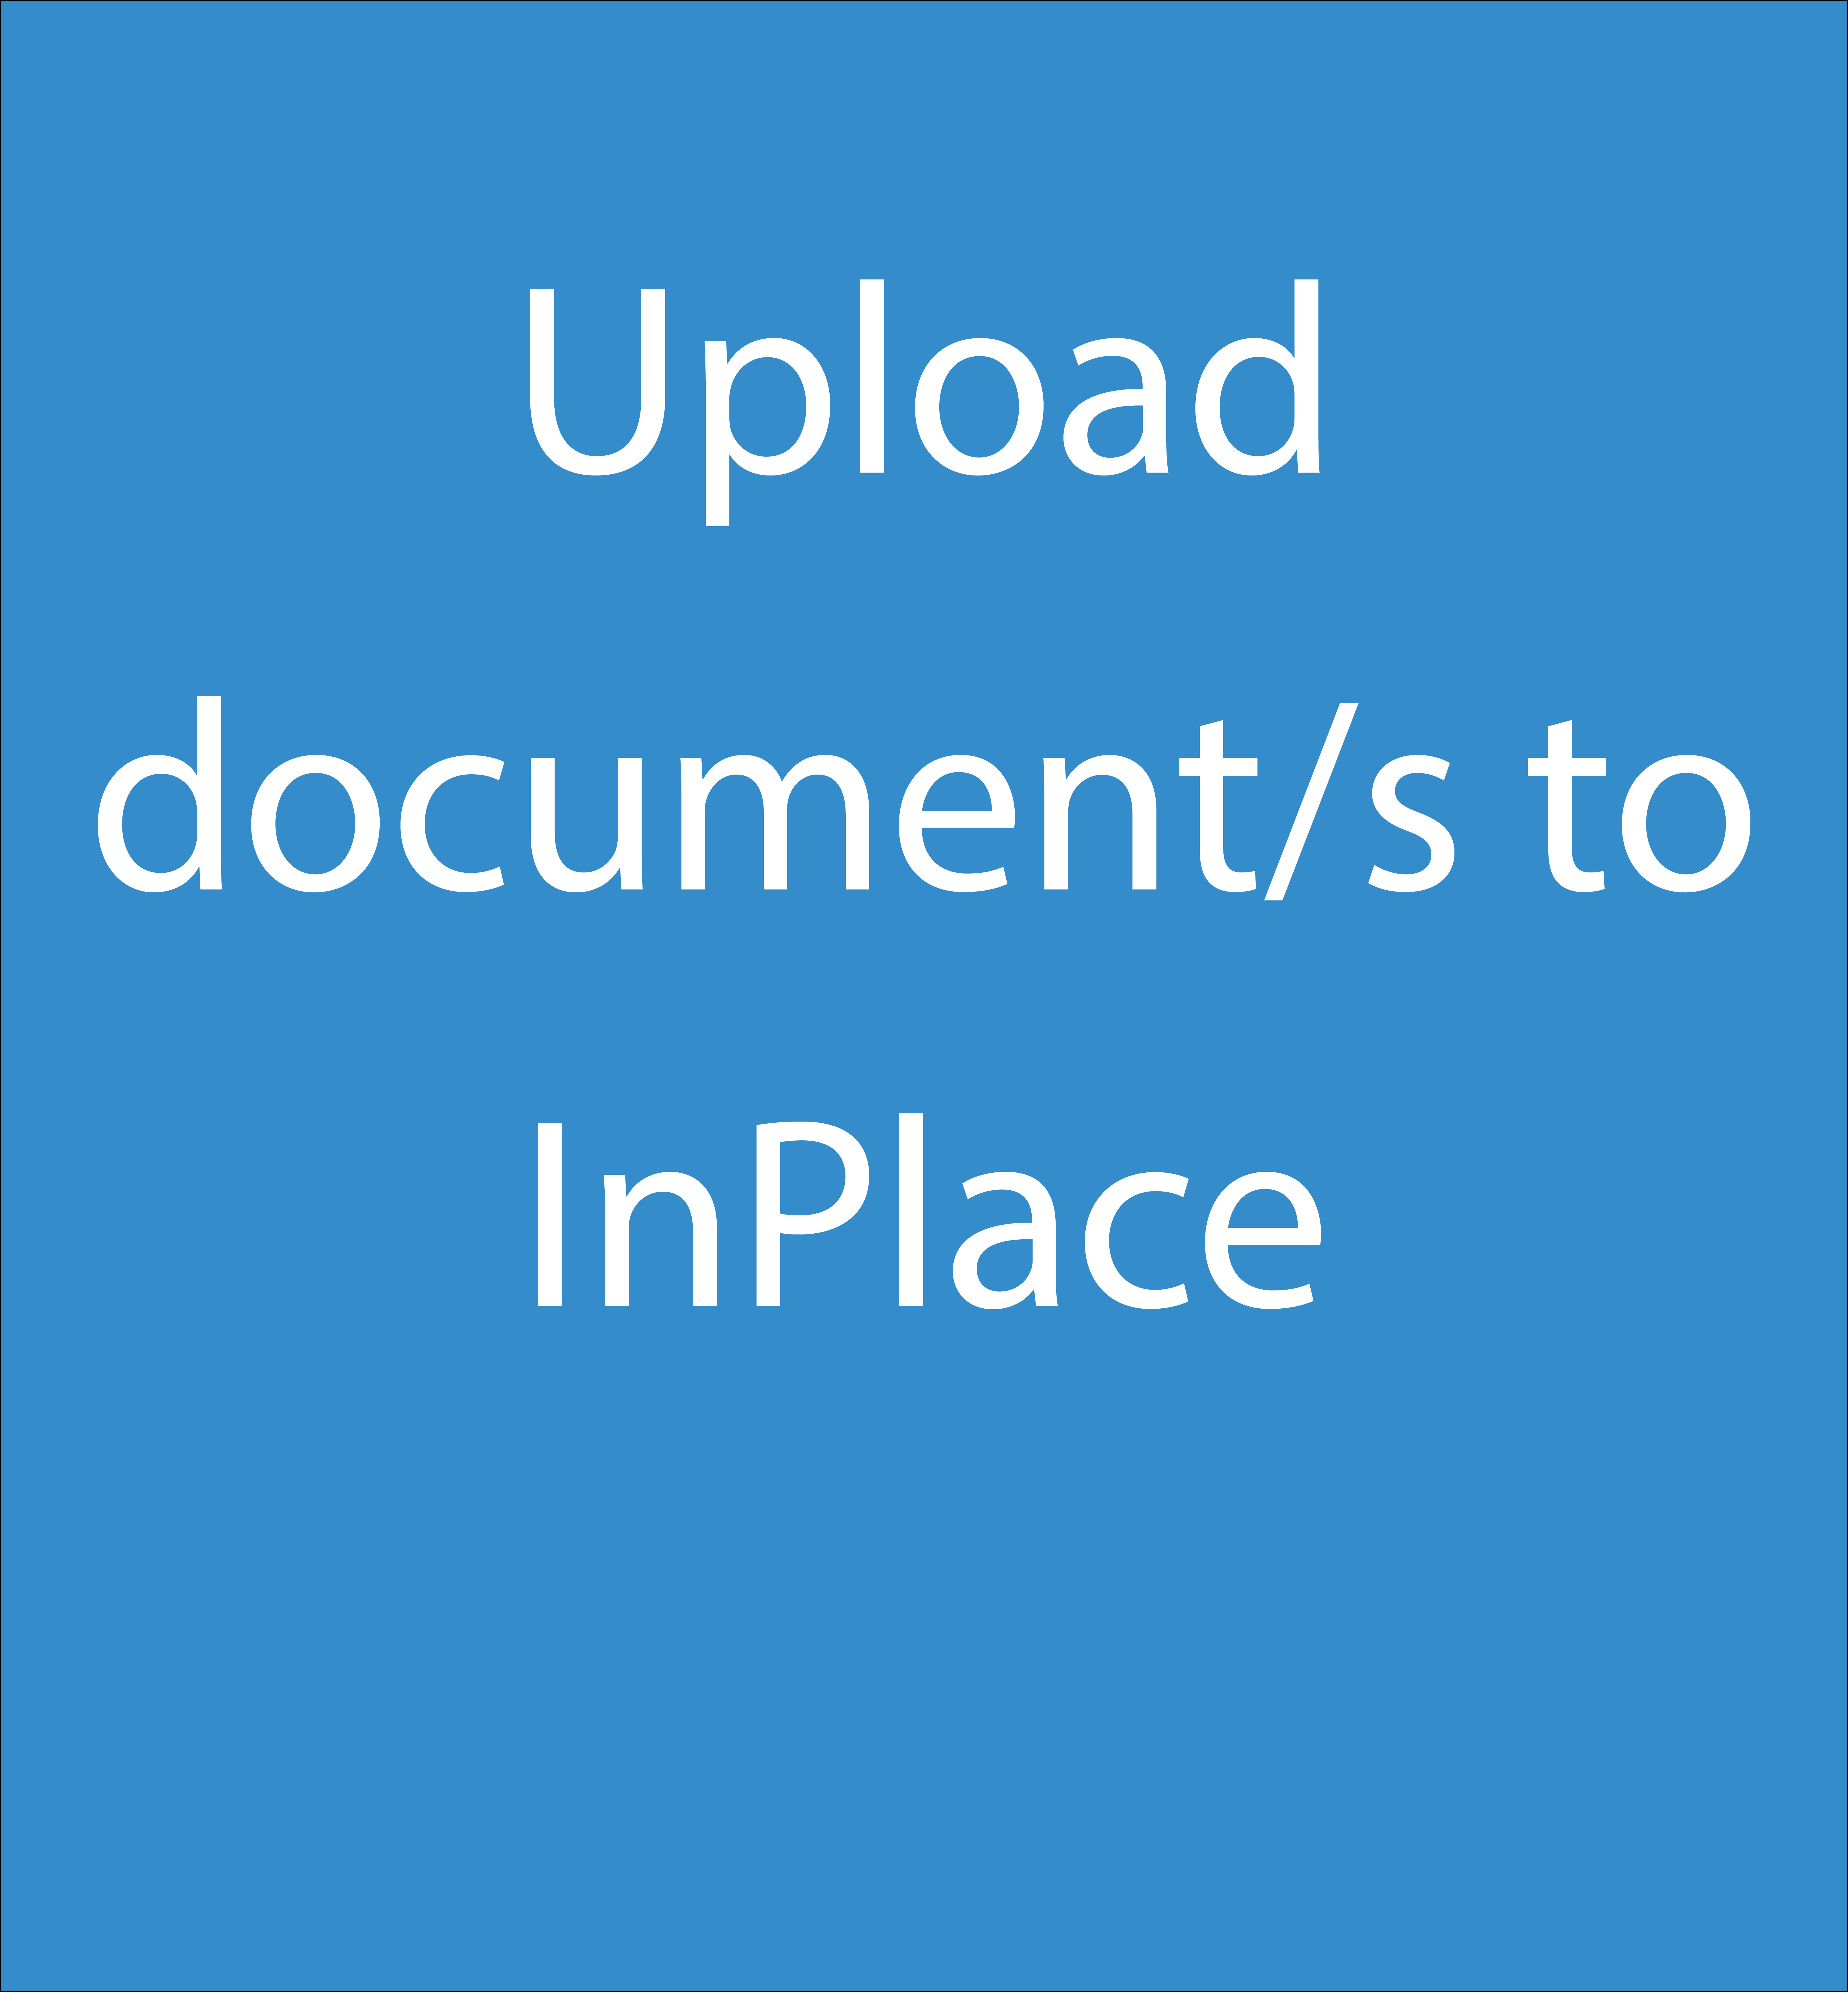 Upload document/s to InPlace